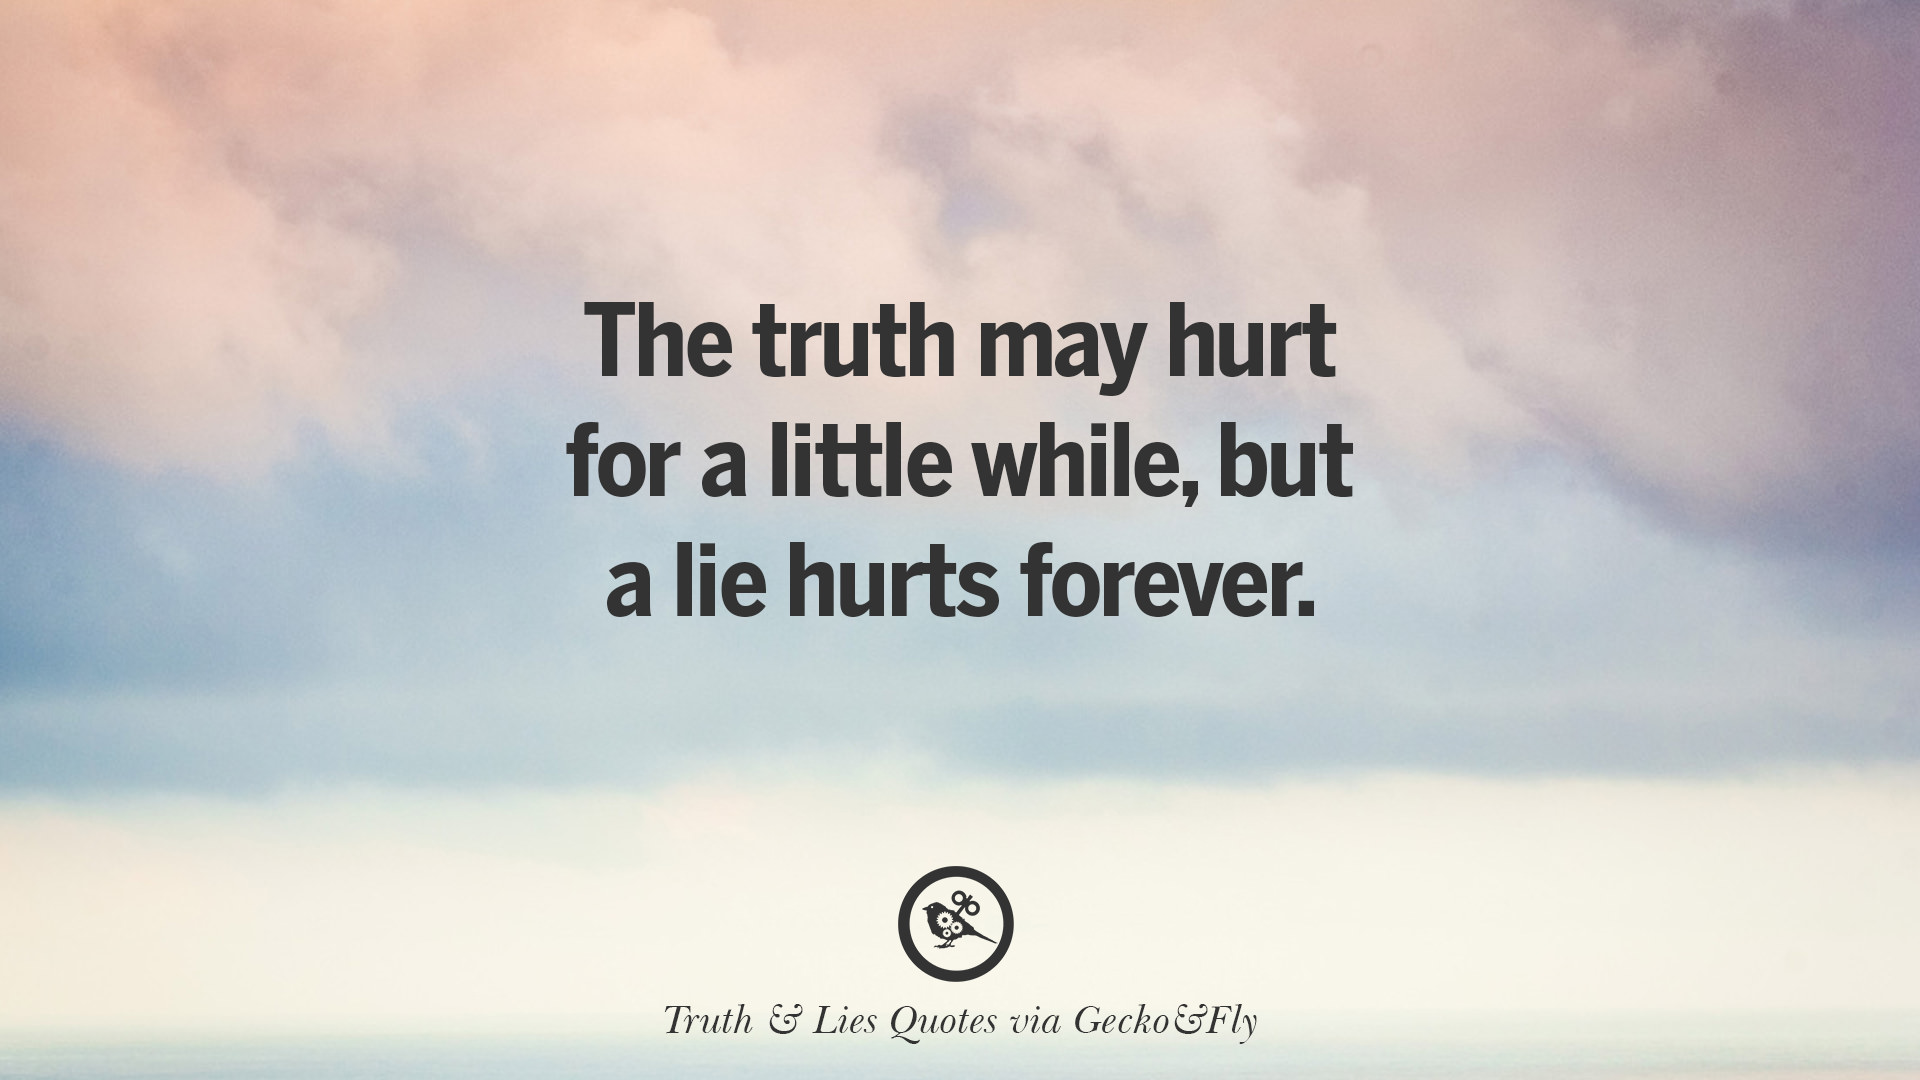 About trust and quotes liars Quotes about